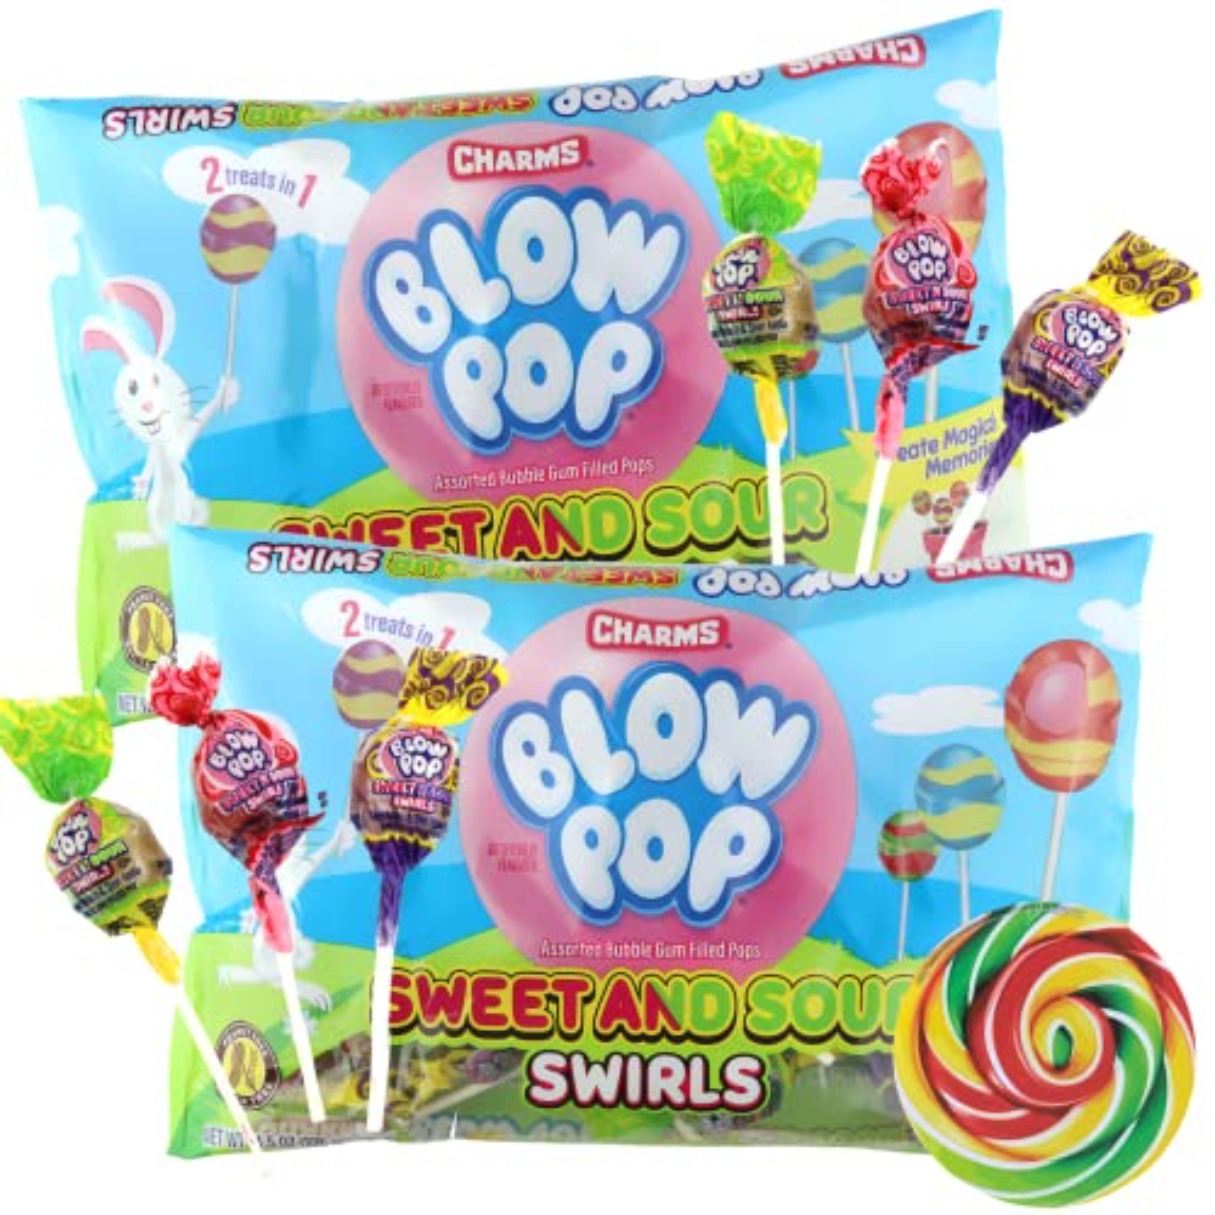 Charms Blow Pop Sweet and Sour Swirls Easter 11.5oz - 12ct